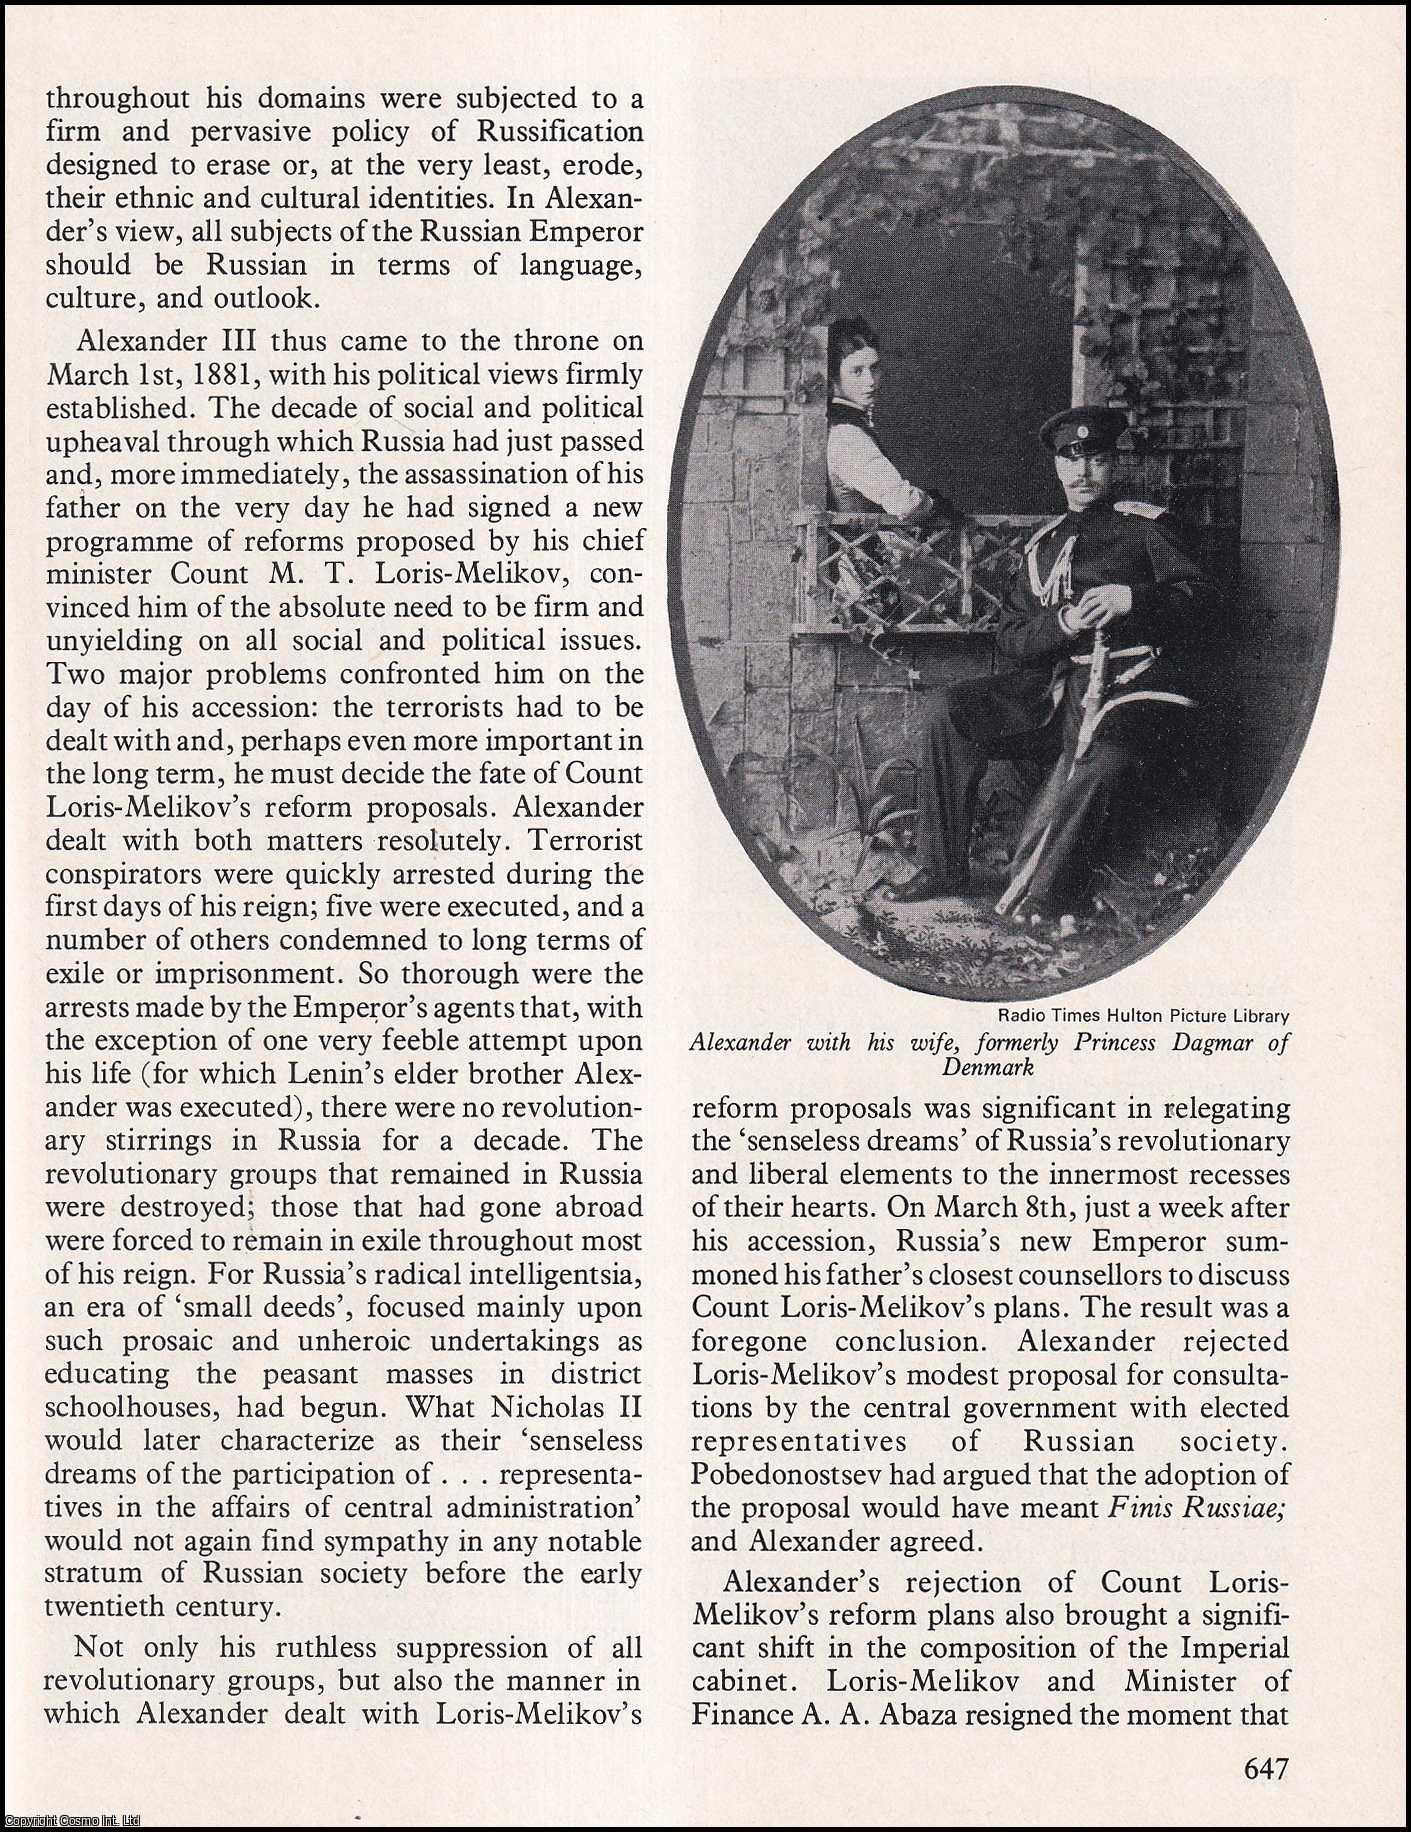 W. Bruce Lincoln - Alexander III of Russia. An original article from History Today 1976.